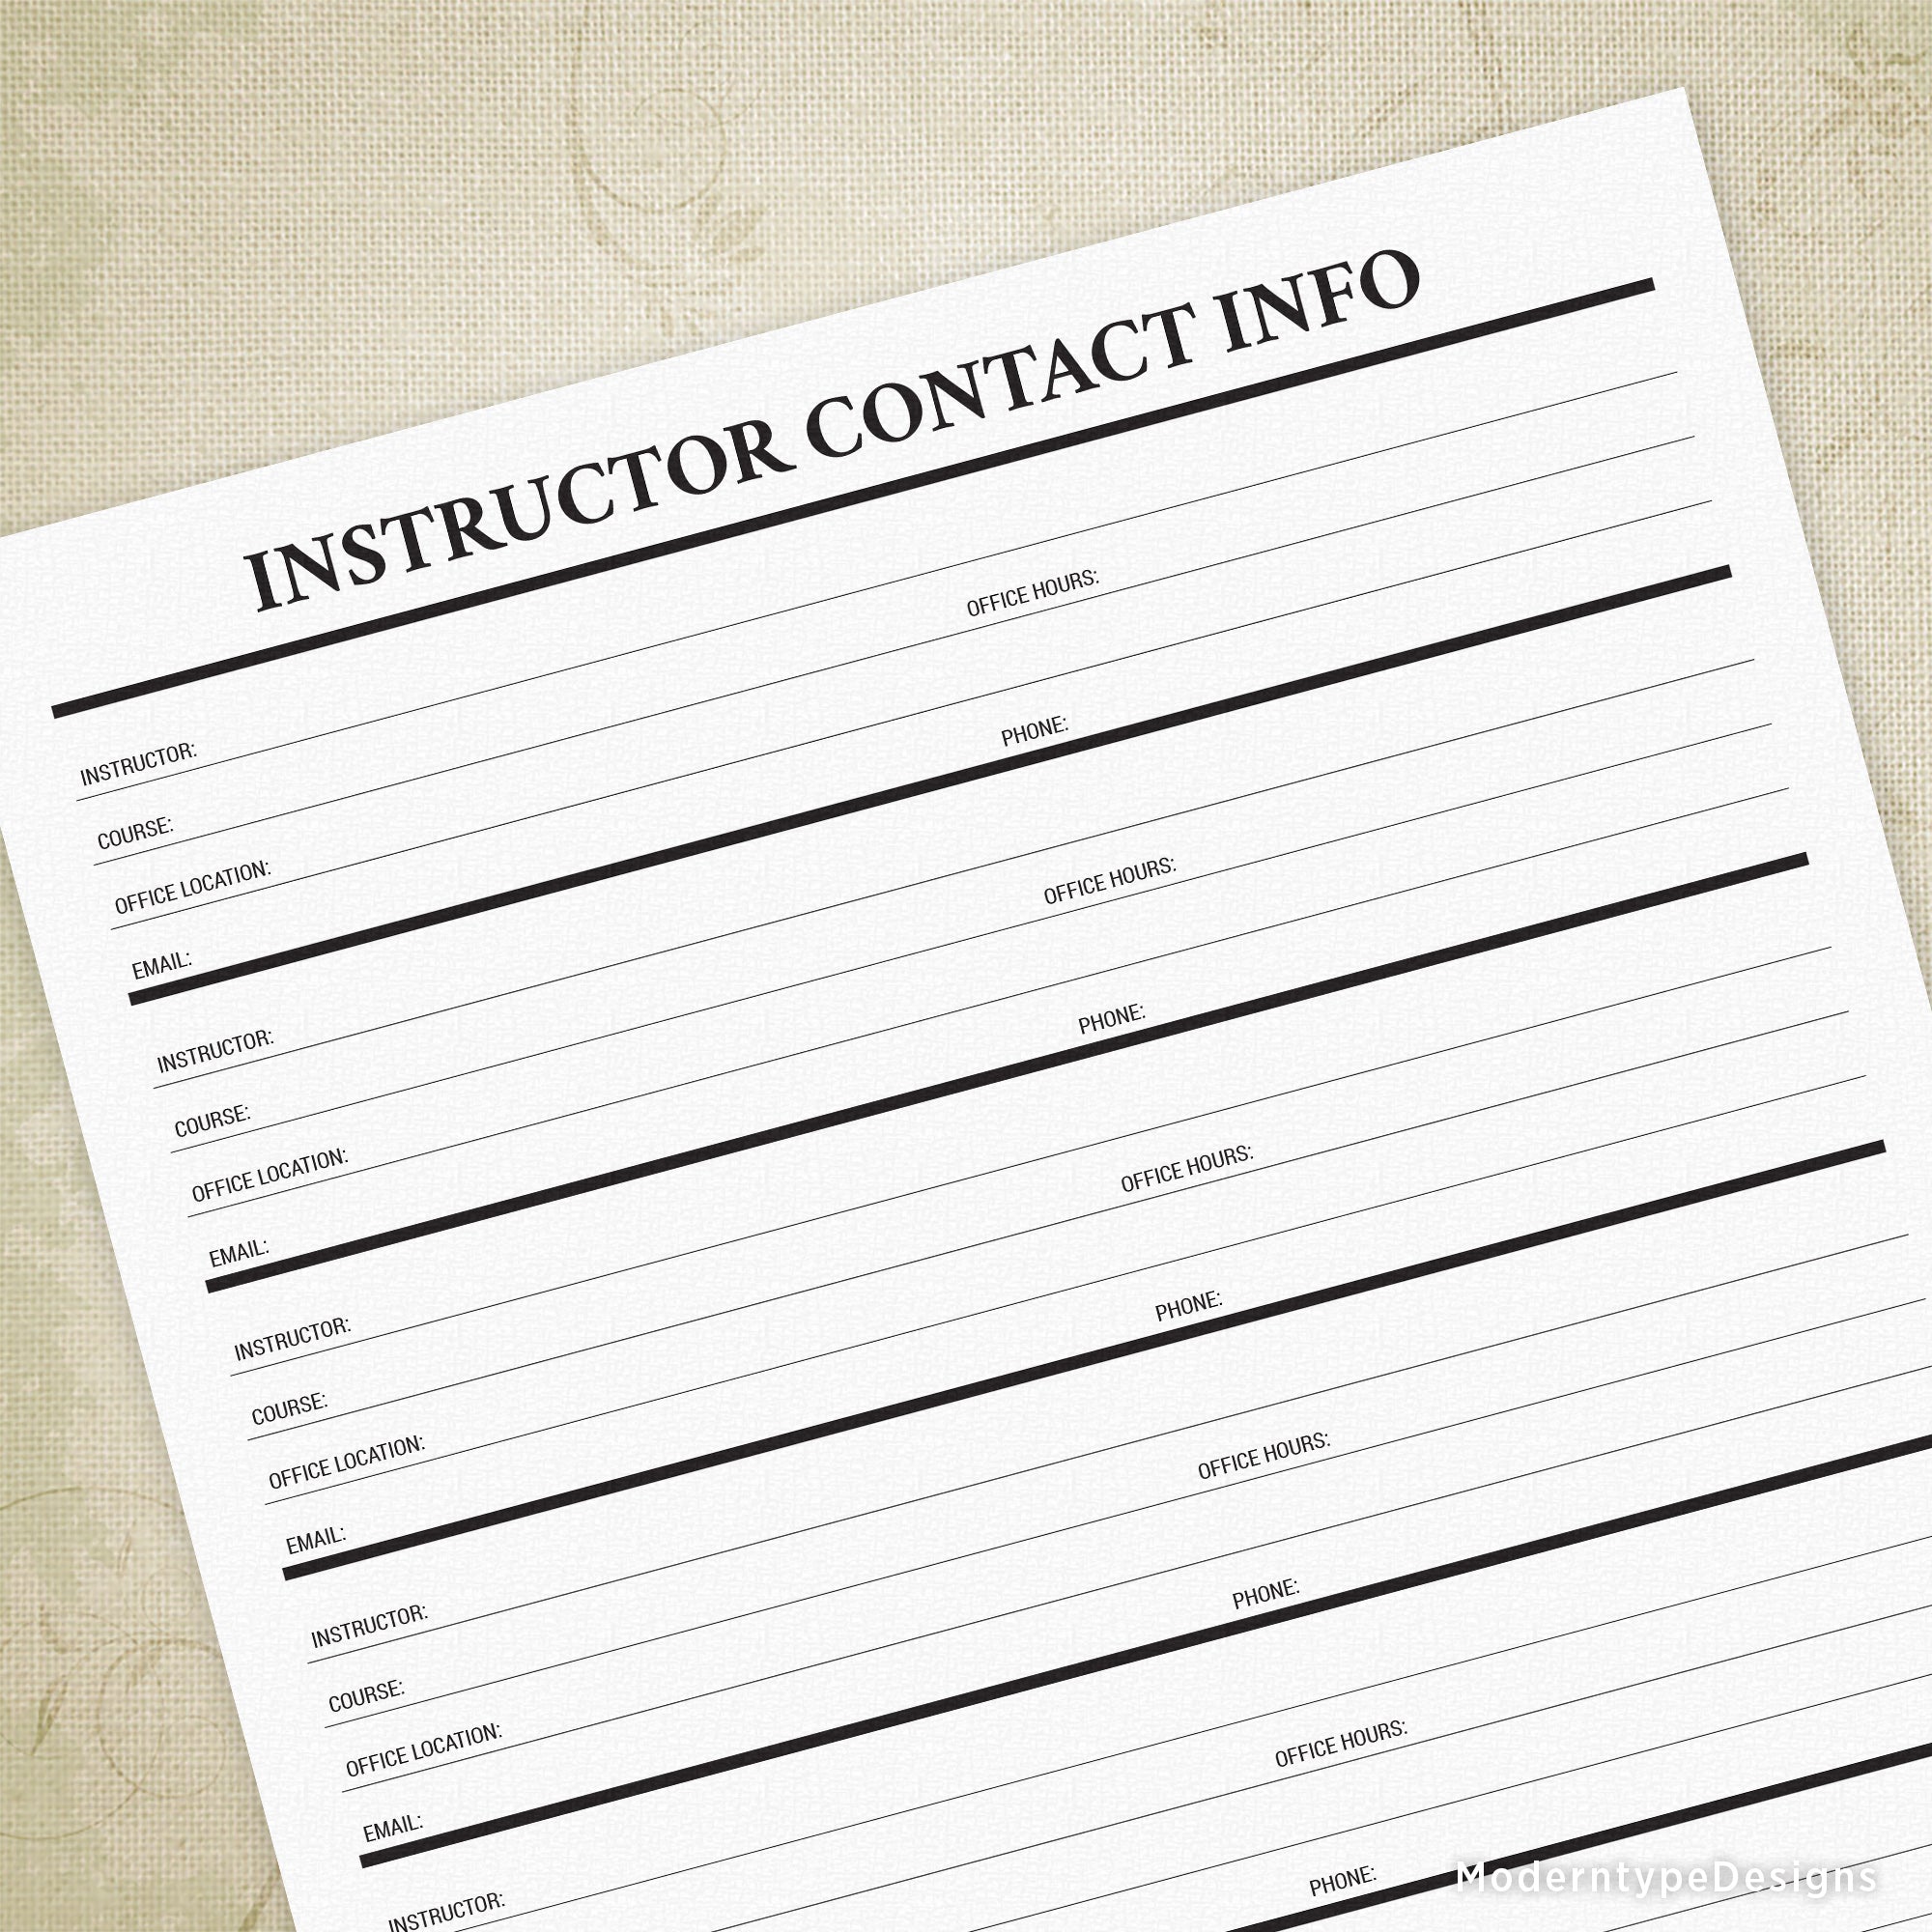 Instructor Contact Info Printable